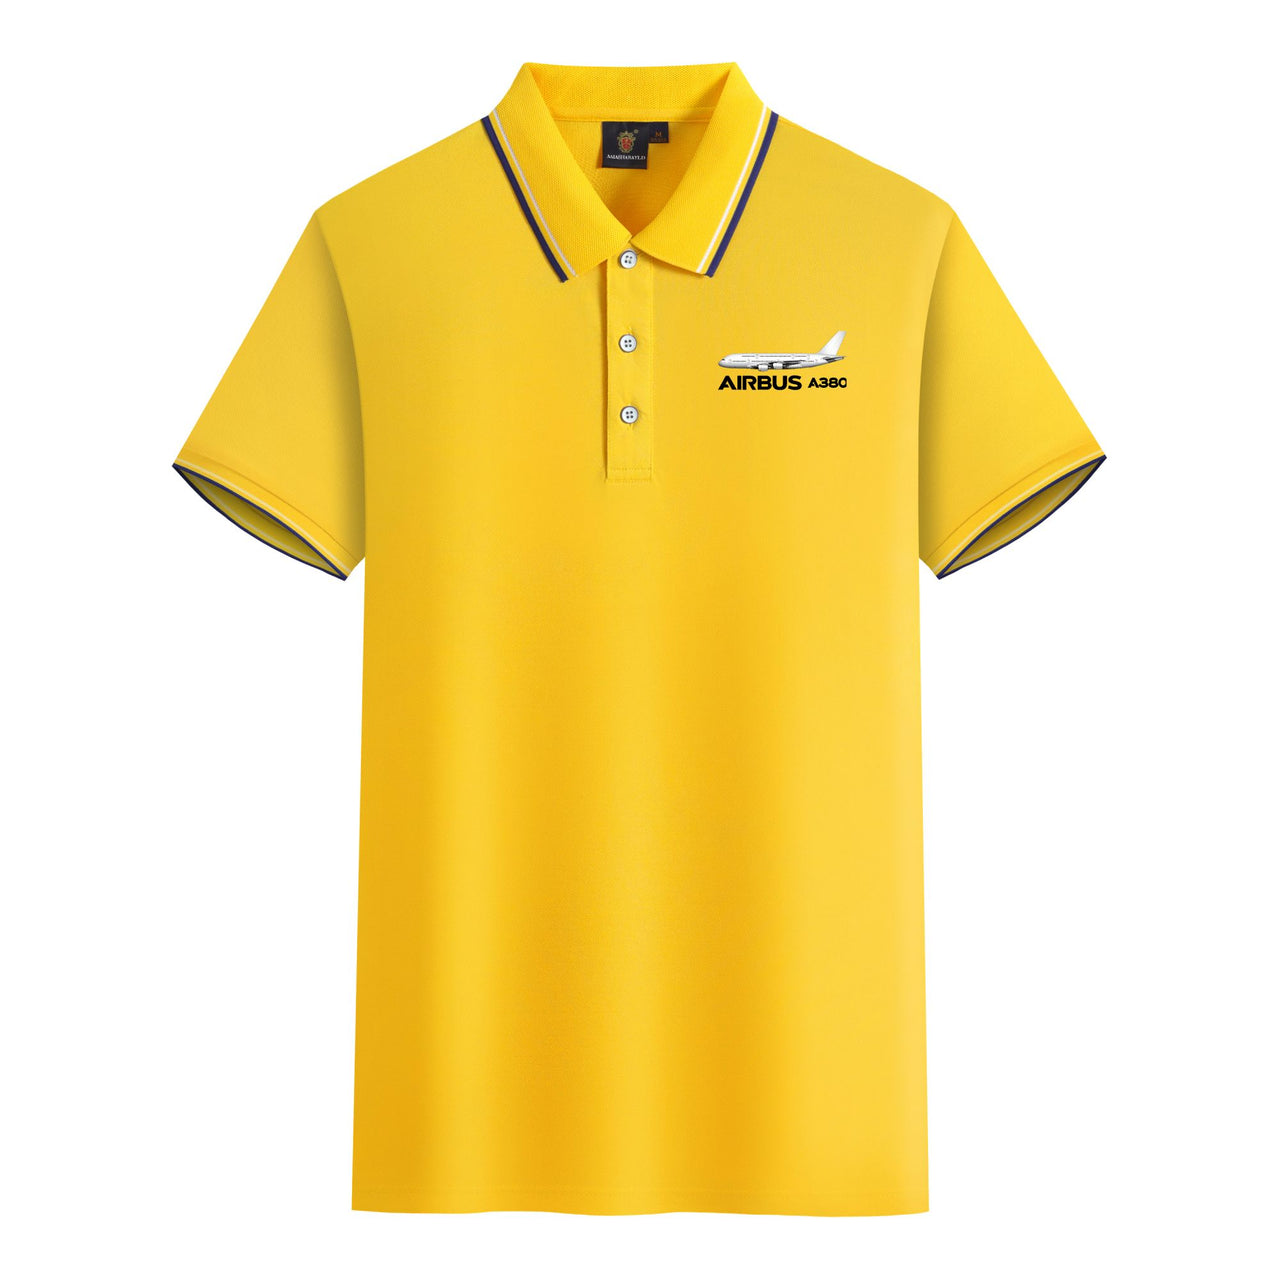 The Airbus A380 Designed Stylish Polo T-Shirts